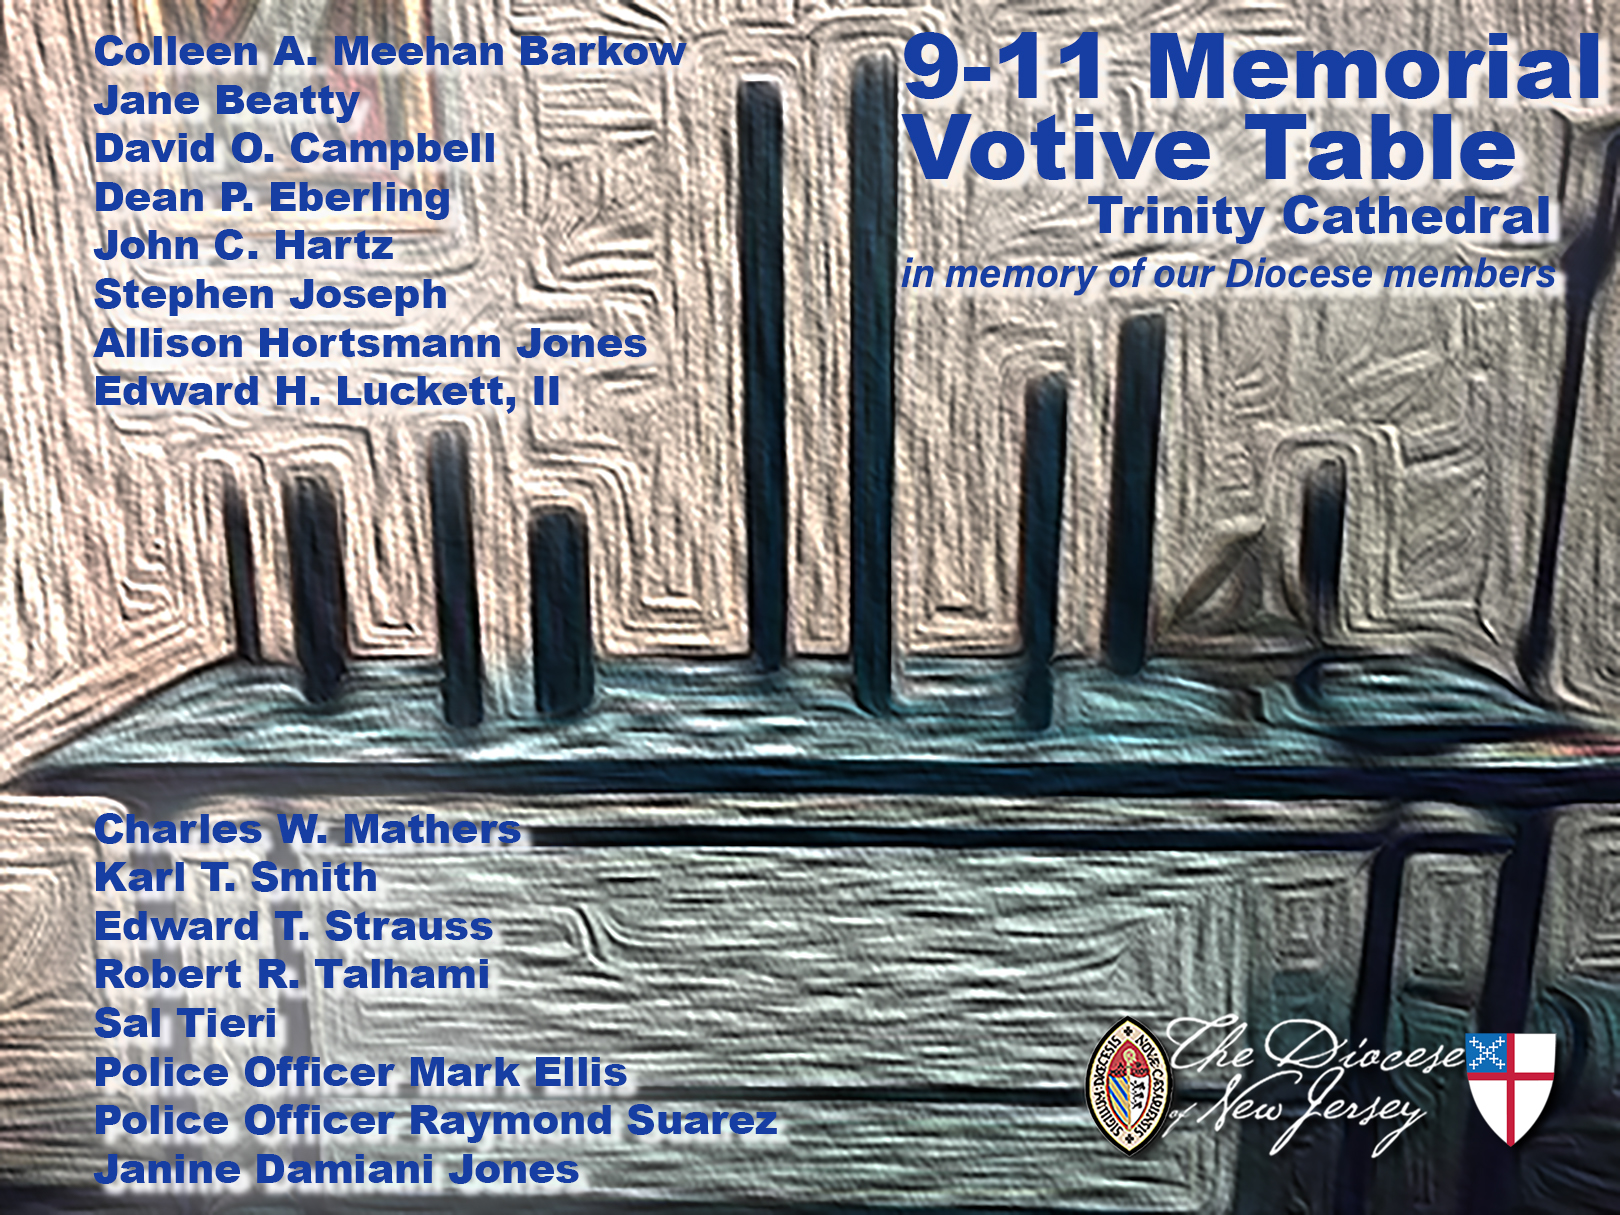 Photo illustration of the 9-11 Memorial Votive Table in Trinity Cathedral. The sculpture and candles honor the memory of Diocese members and friends killed 21 years ago in the terrorist attacks at the World Trade Center.